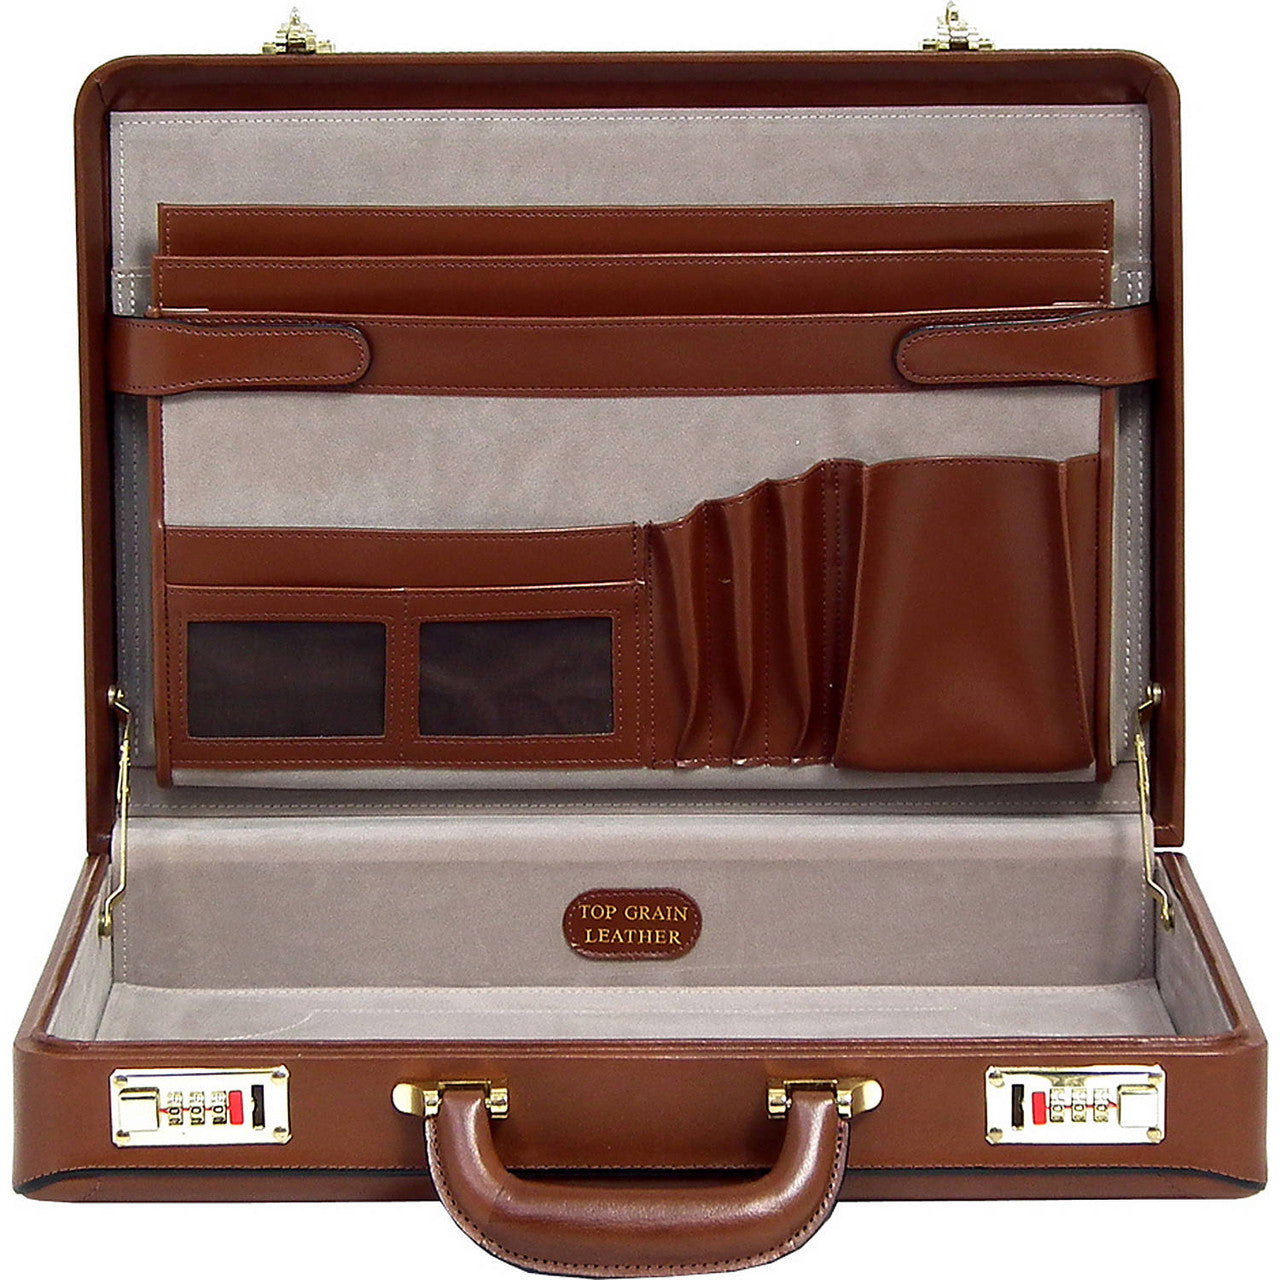 Daley Leather Attache Case - Leather Loom